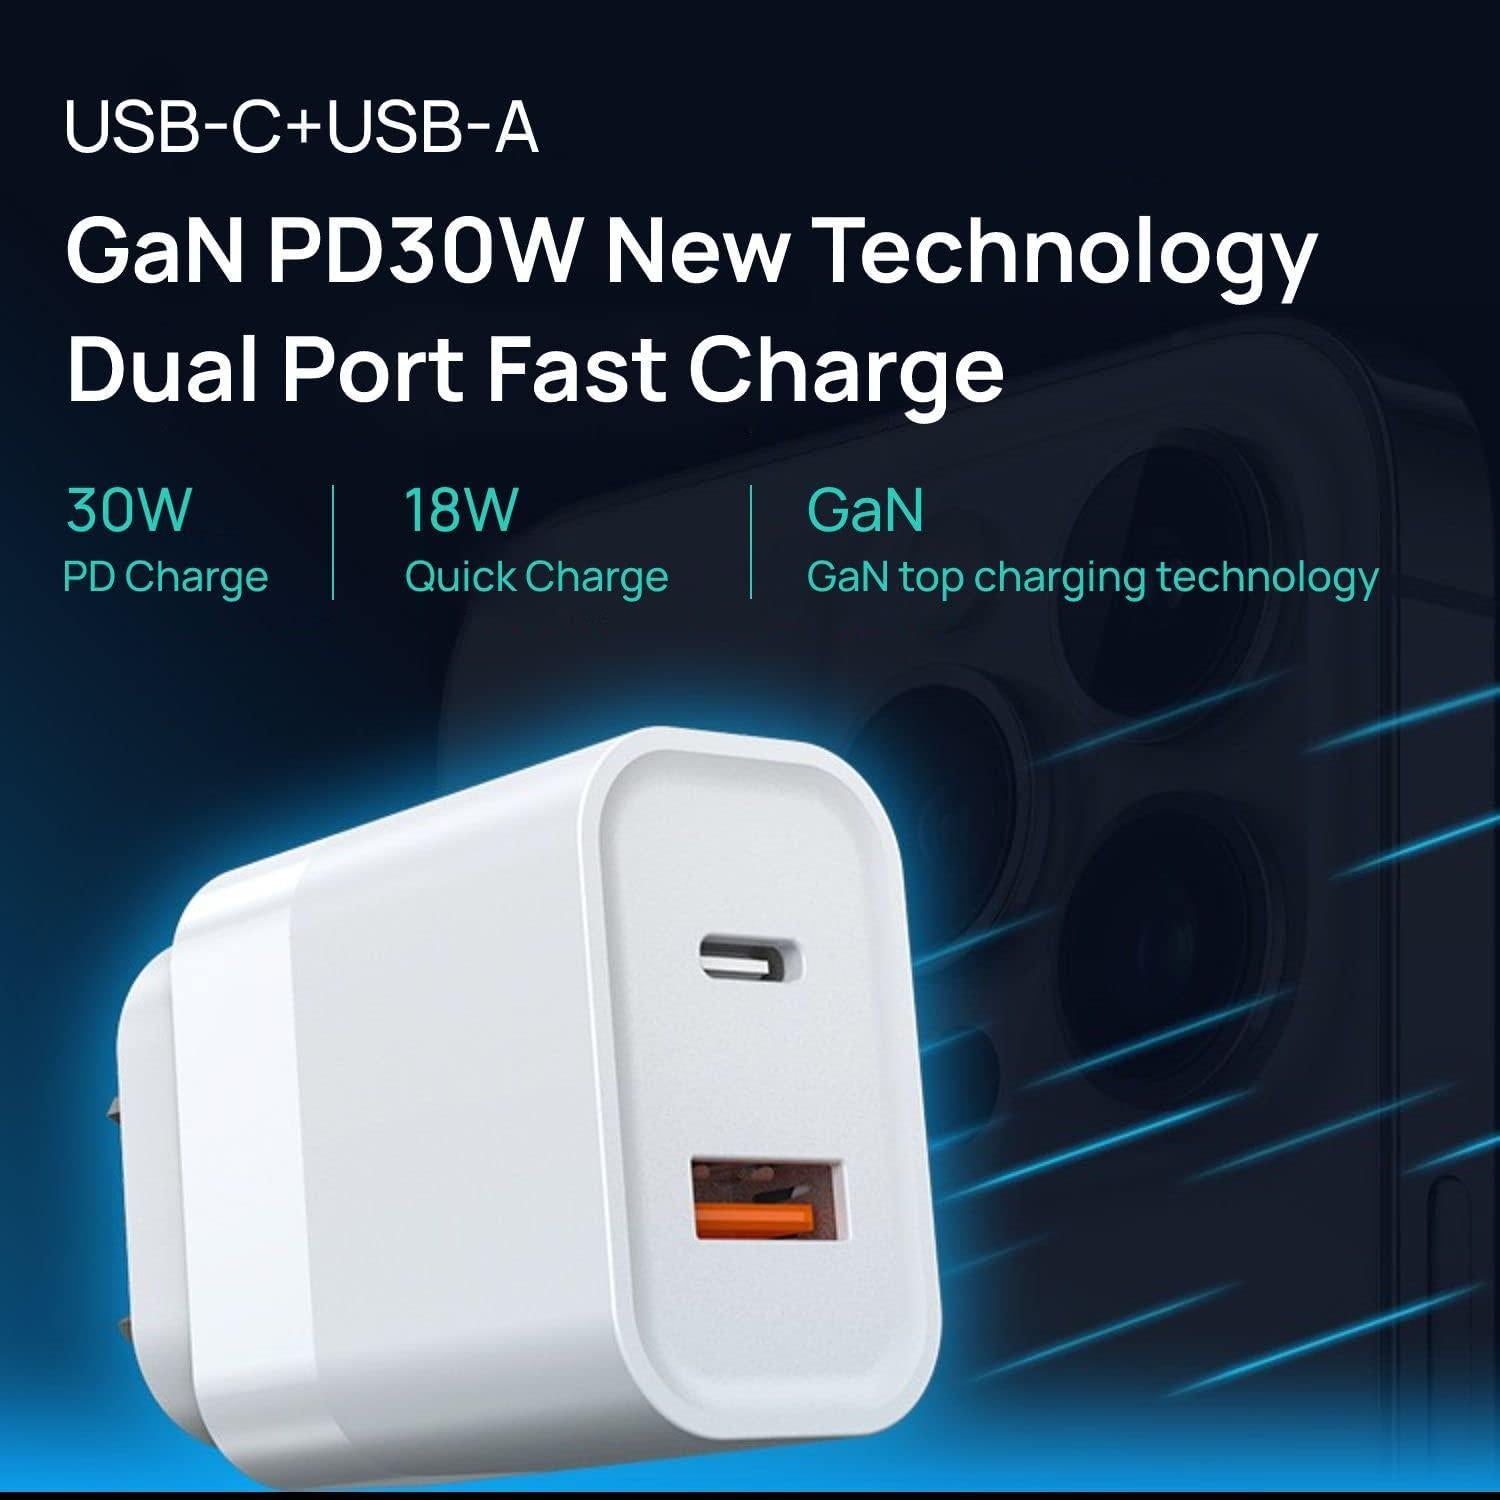 Erunto, GaN 30W Fast Charger,AU Plug USB C Charger,2-Port Wall Charger with 30W Power Delivery USB-C and 18W Quick Charge 3.0 USB-A Port Compatible with iPhone 14/13,Samsung, iPad, AirPod and More